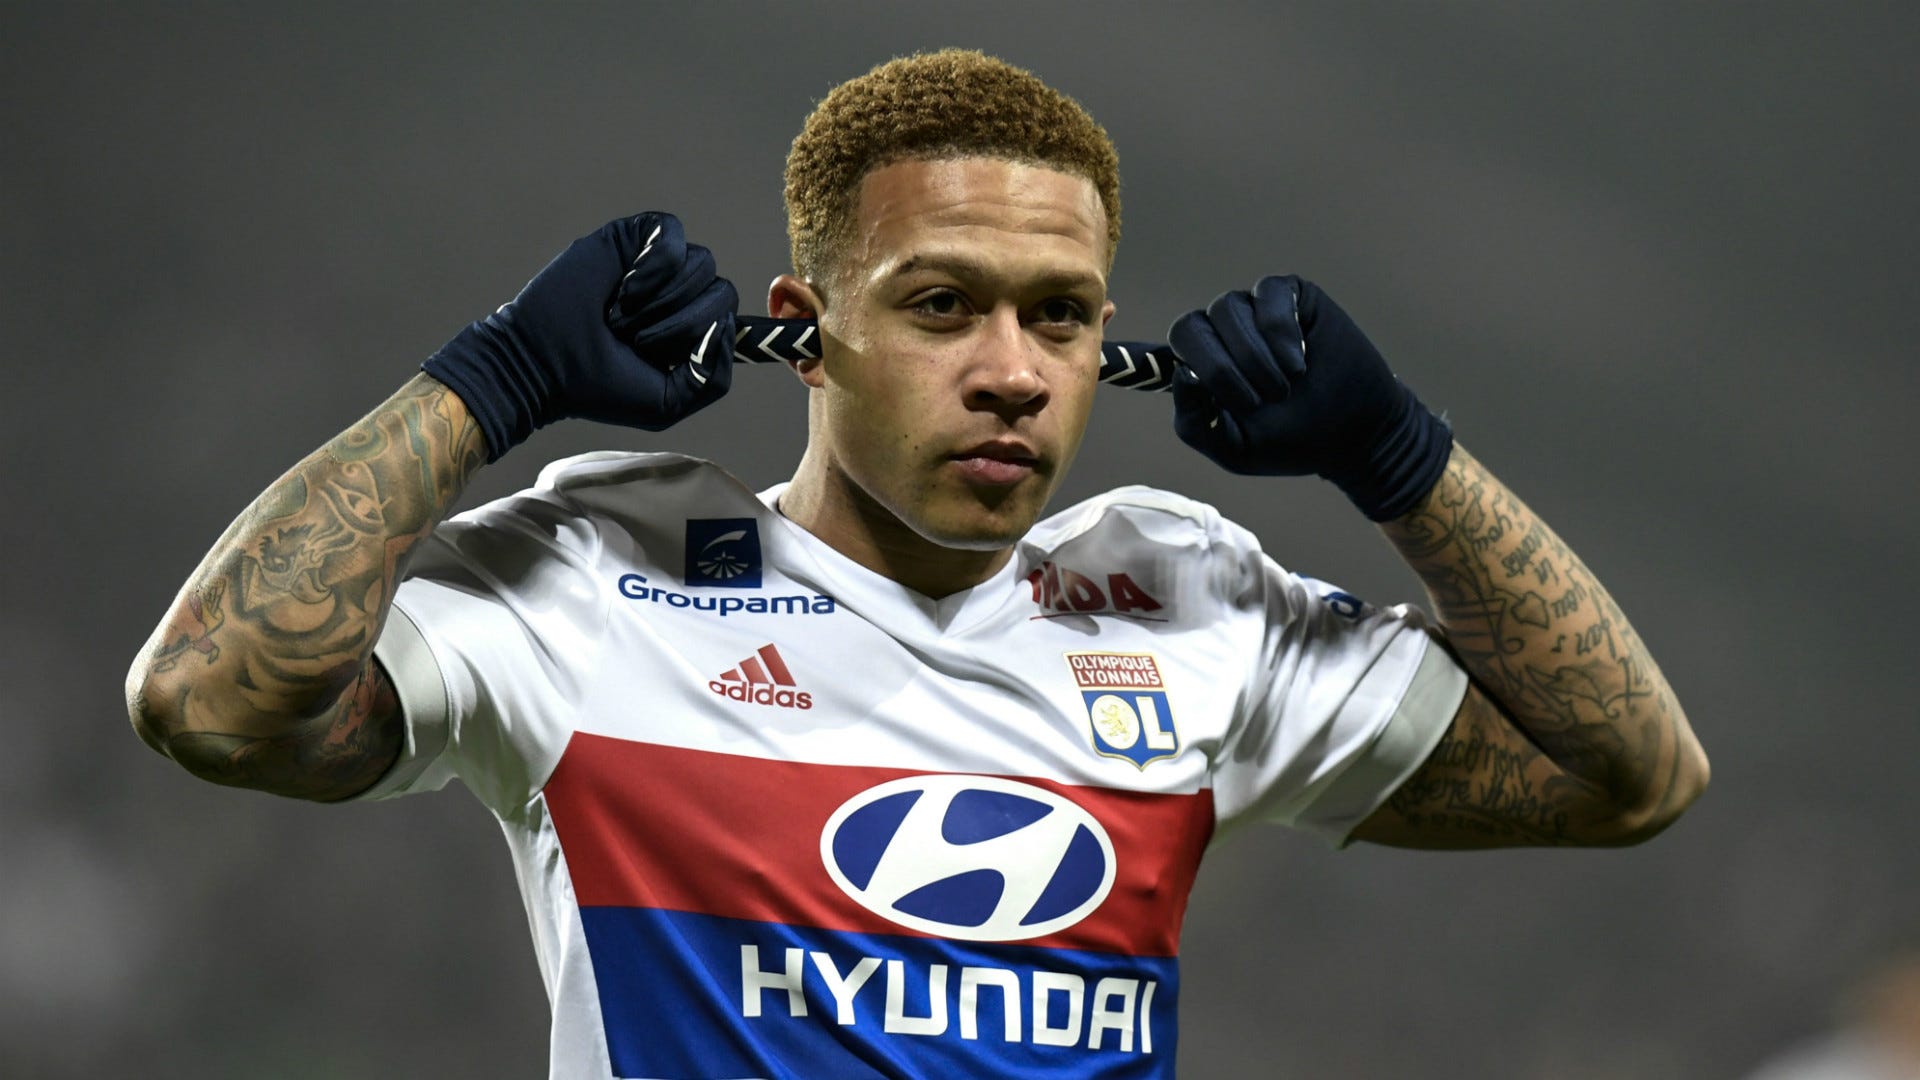 Depay was a flop at Man Utd but has been reborn and will star for